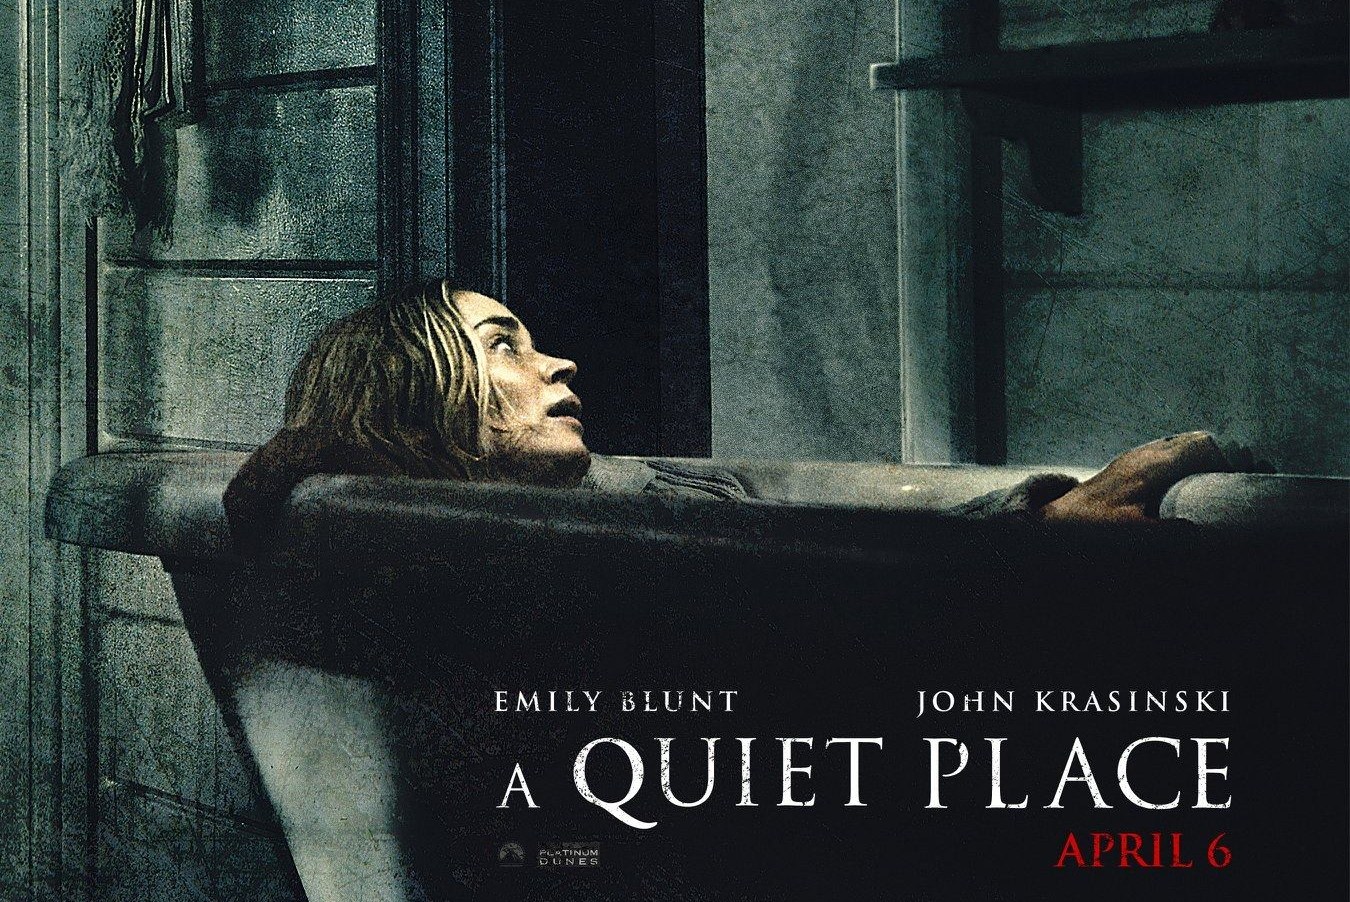 a quiet place online free full movie download